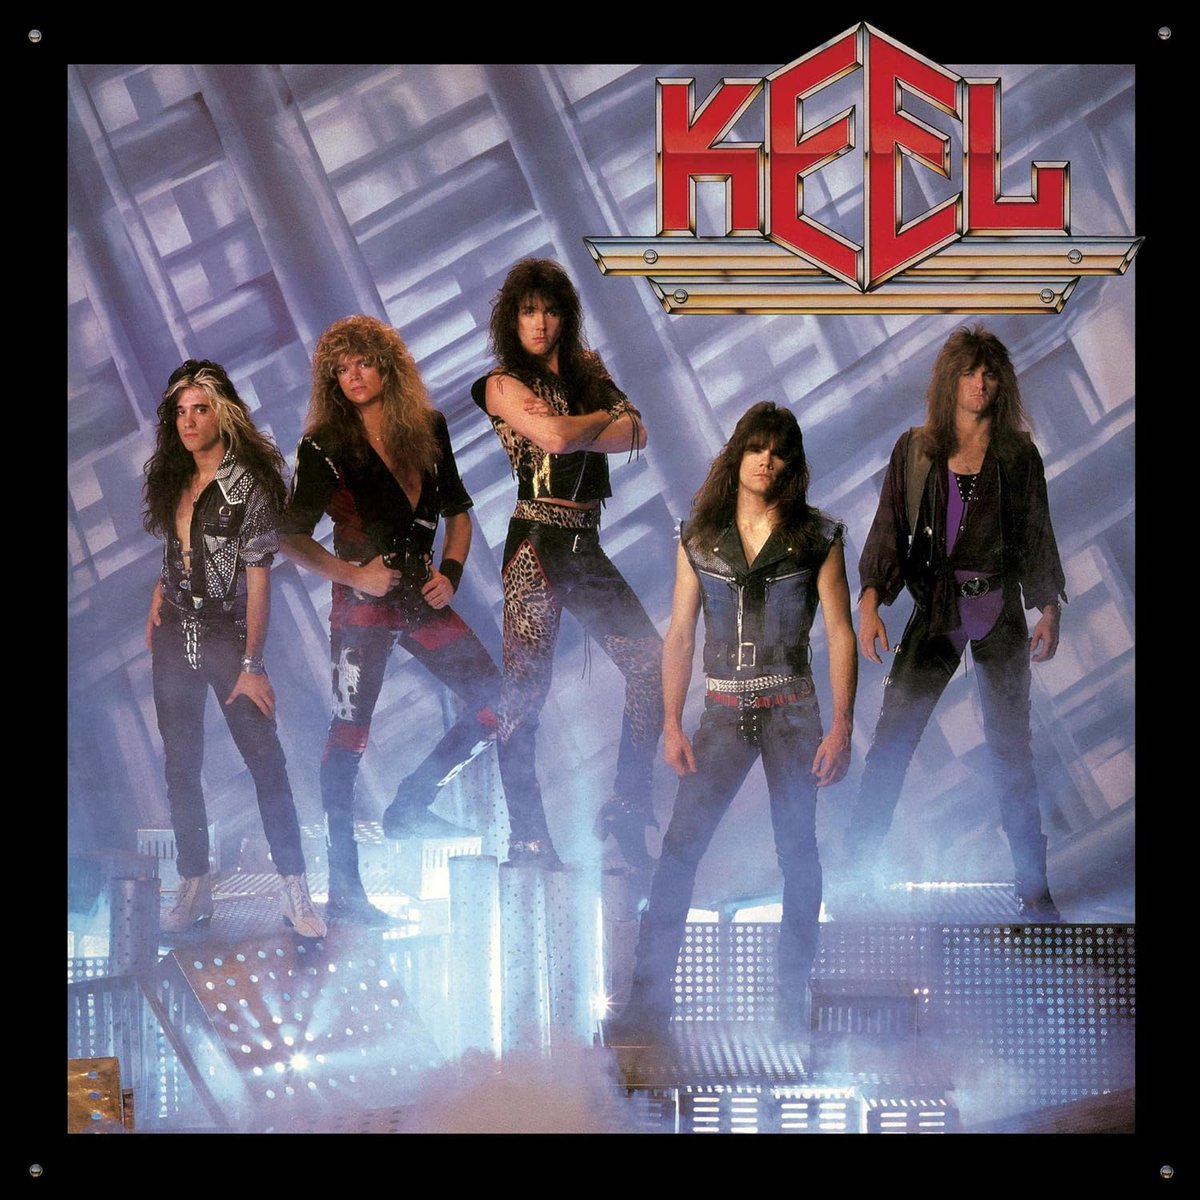 A #Tuesday trio!
The 140th #album listened to from 1st to final track is the 4th and S/T by #Keel.
Great tunes to finish the day!
Thanks @ronkeel
Standouts:
Cherry Lane
Calm Before The Storm
I Said The Wrong Thing To The Right Person
#Hardrock #glammetal
#RockSolidAlbumADay2024